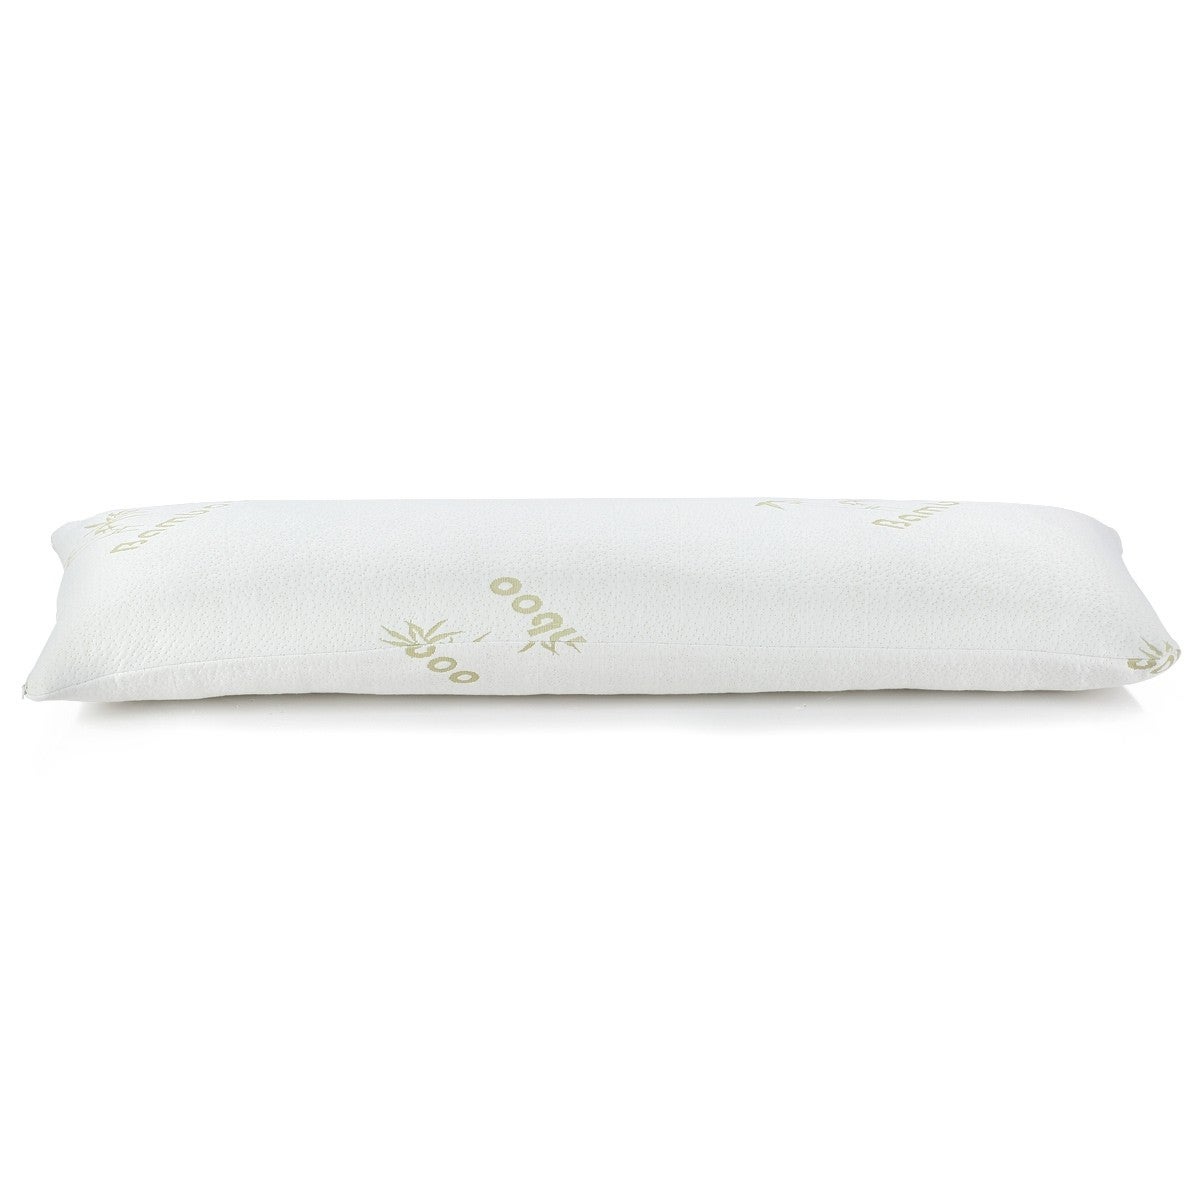 Shredded Memory Foam Pillow For Body with Bamboo Cover